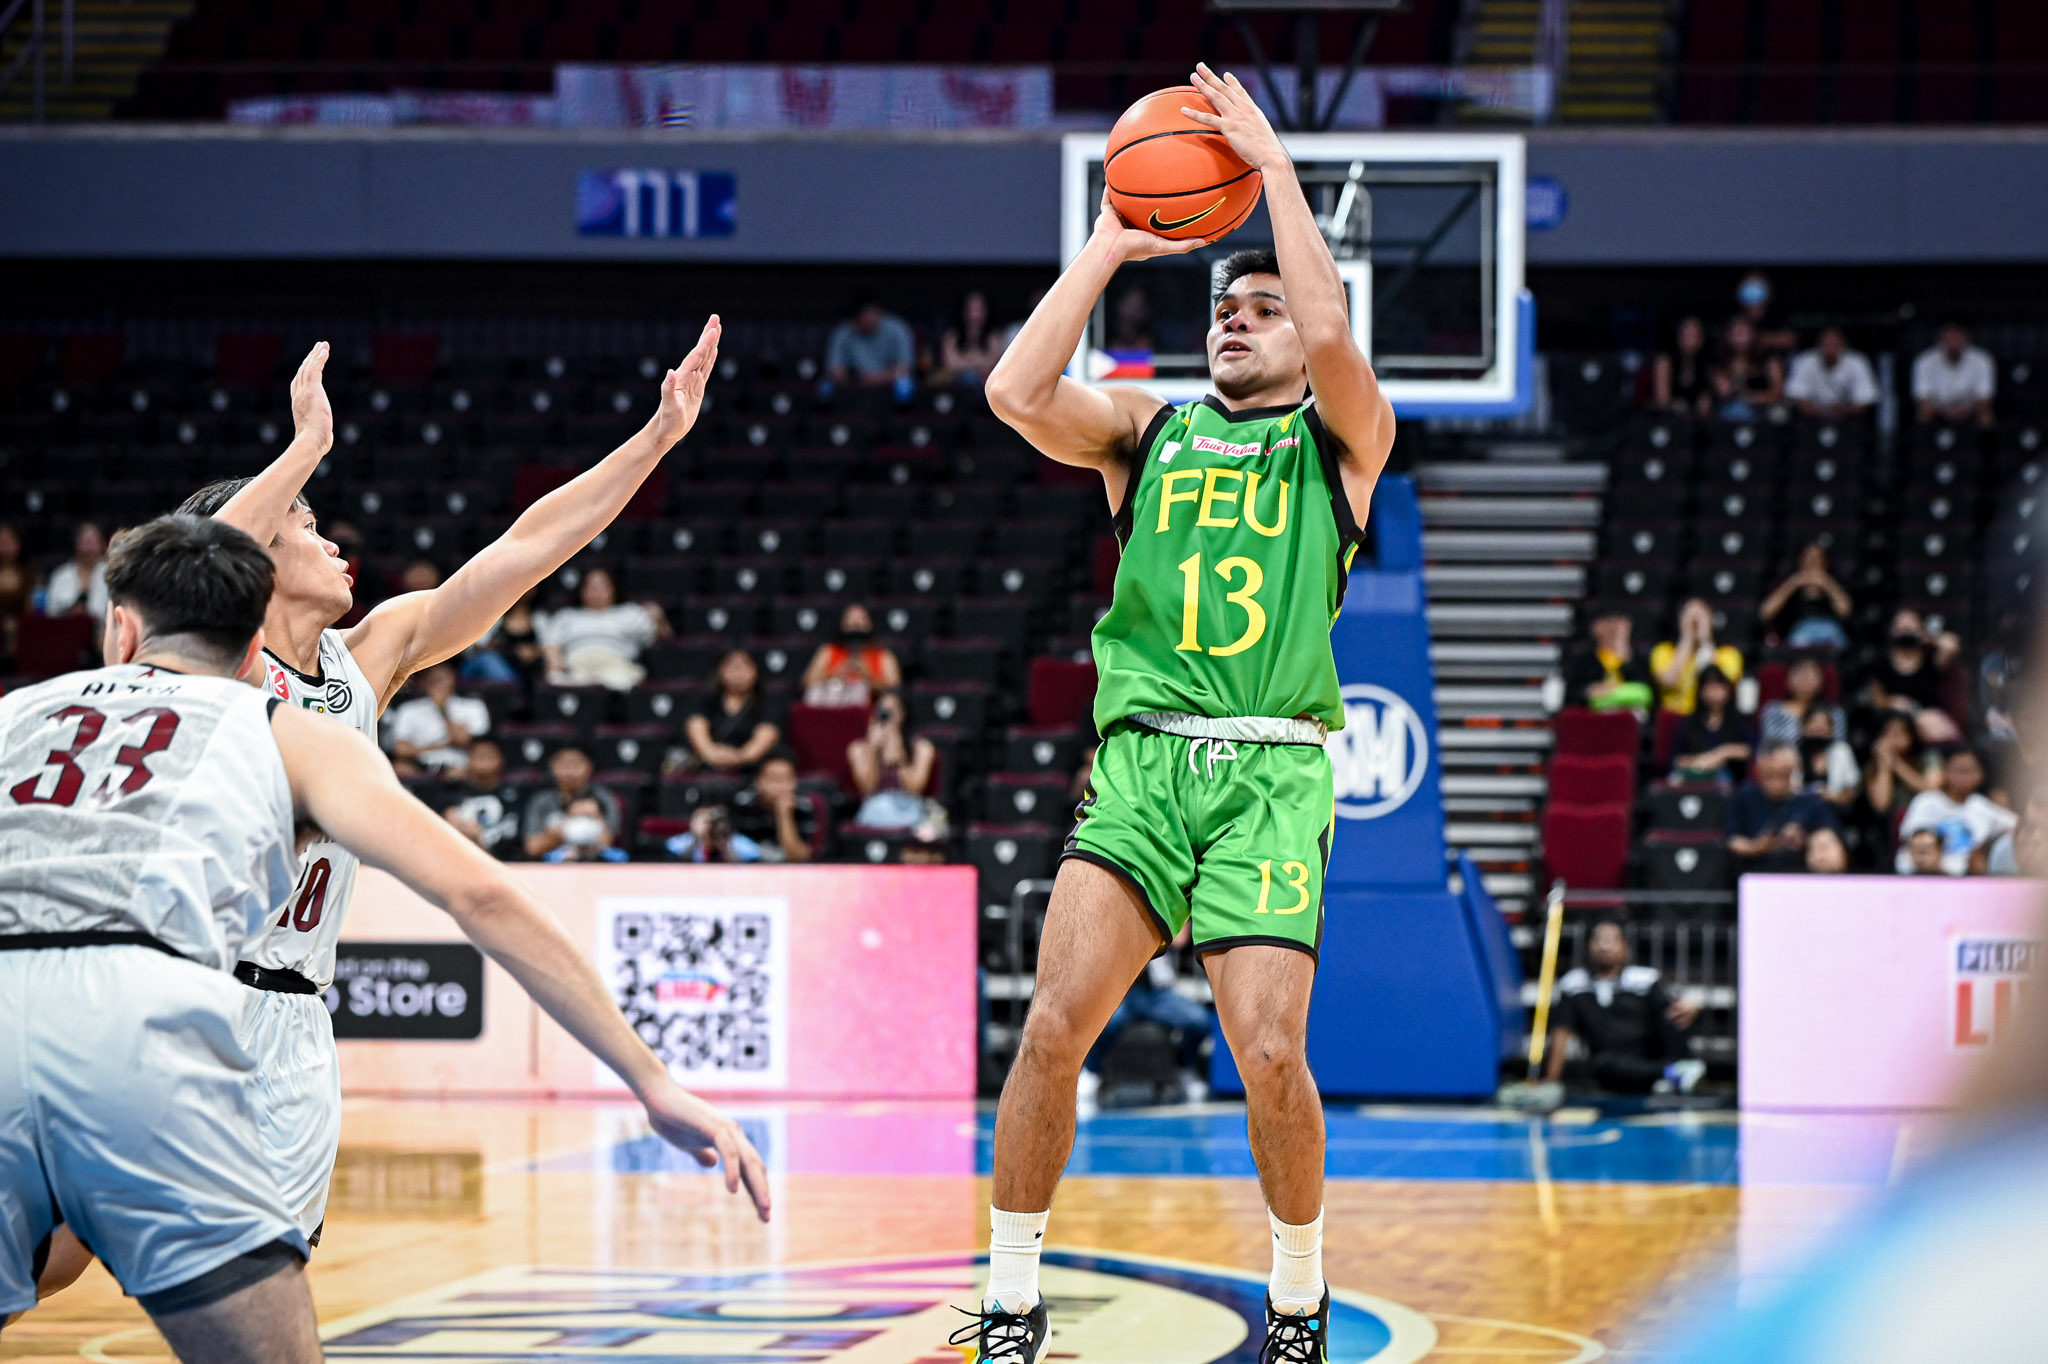 Losing several key players in Season 87, FEU's scouts are likely on the lookout for new talents for UAAP Season 87. (Photo credit: UAAP Media Bureau) 